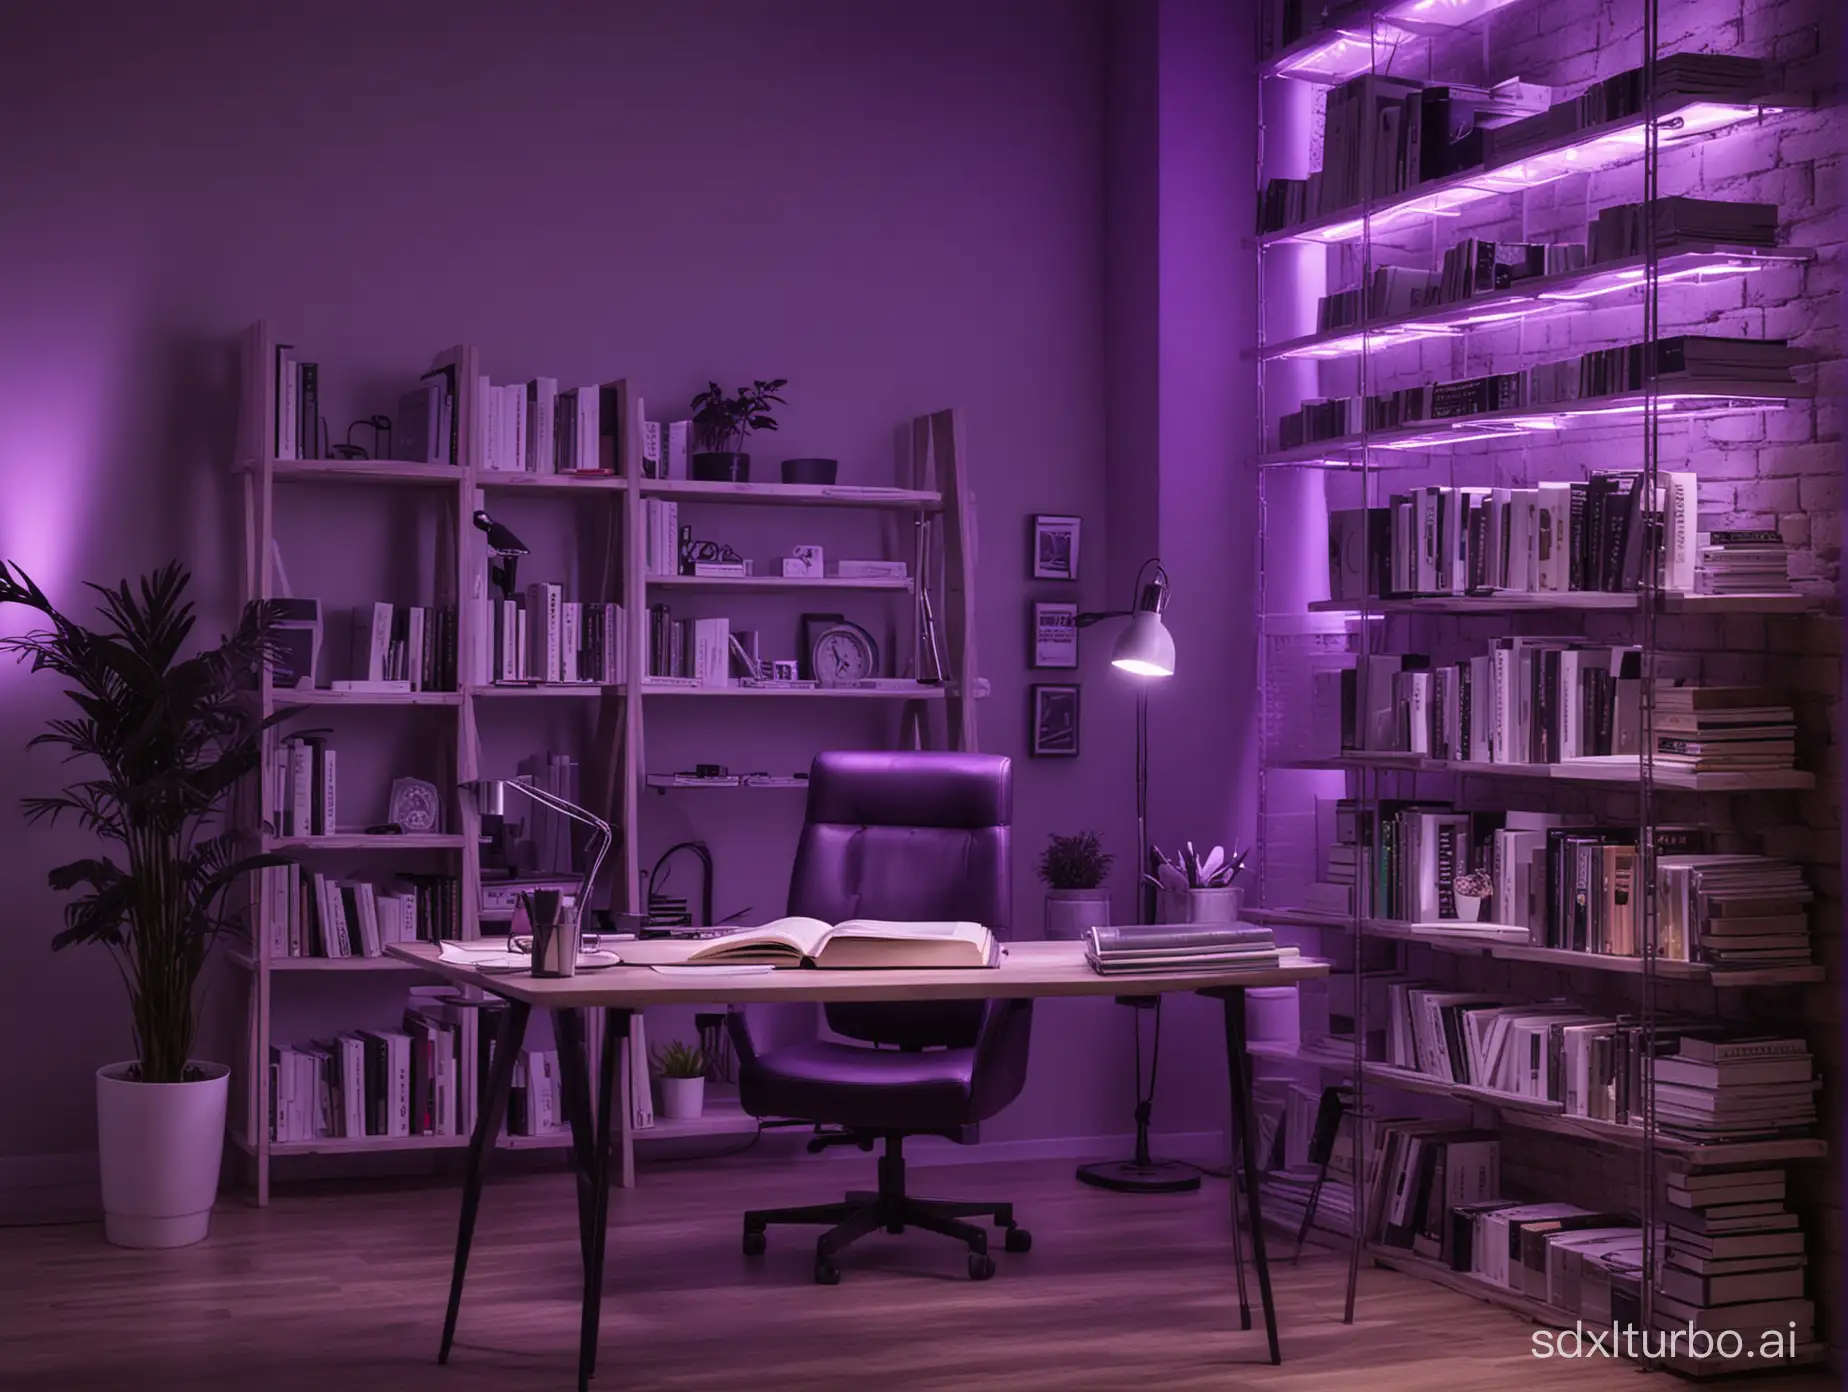 create an office background with books and cool purple lighting